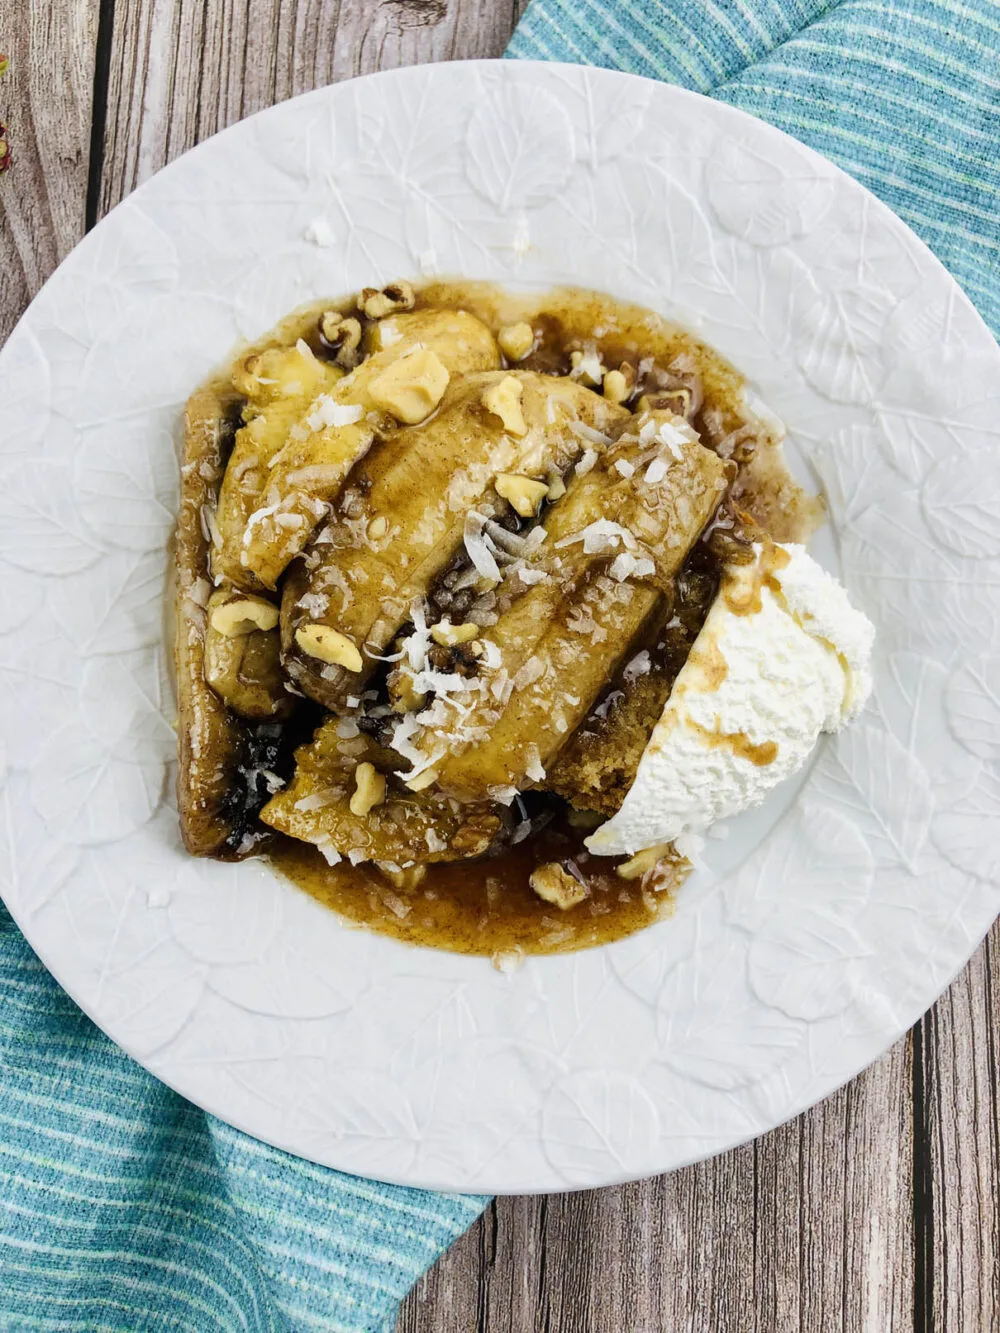 This dessert is bananas - literally! My unique Bananas Foster recipe is made straight in the slow cooker and SO simple to whip-up! Best served with a scoop of vanilla ice cream and over pound cake.